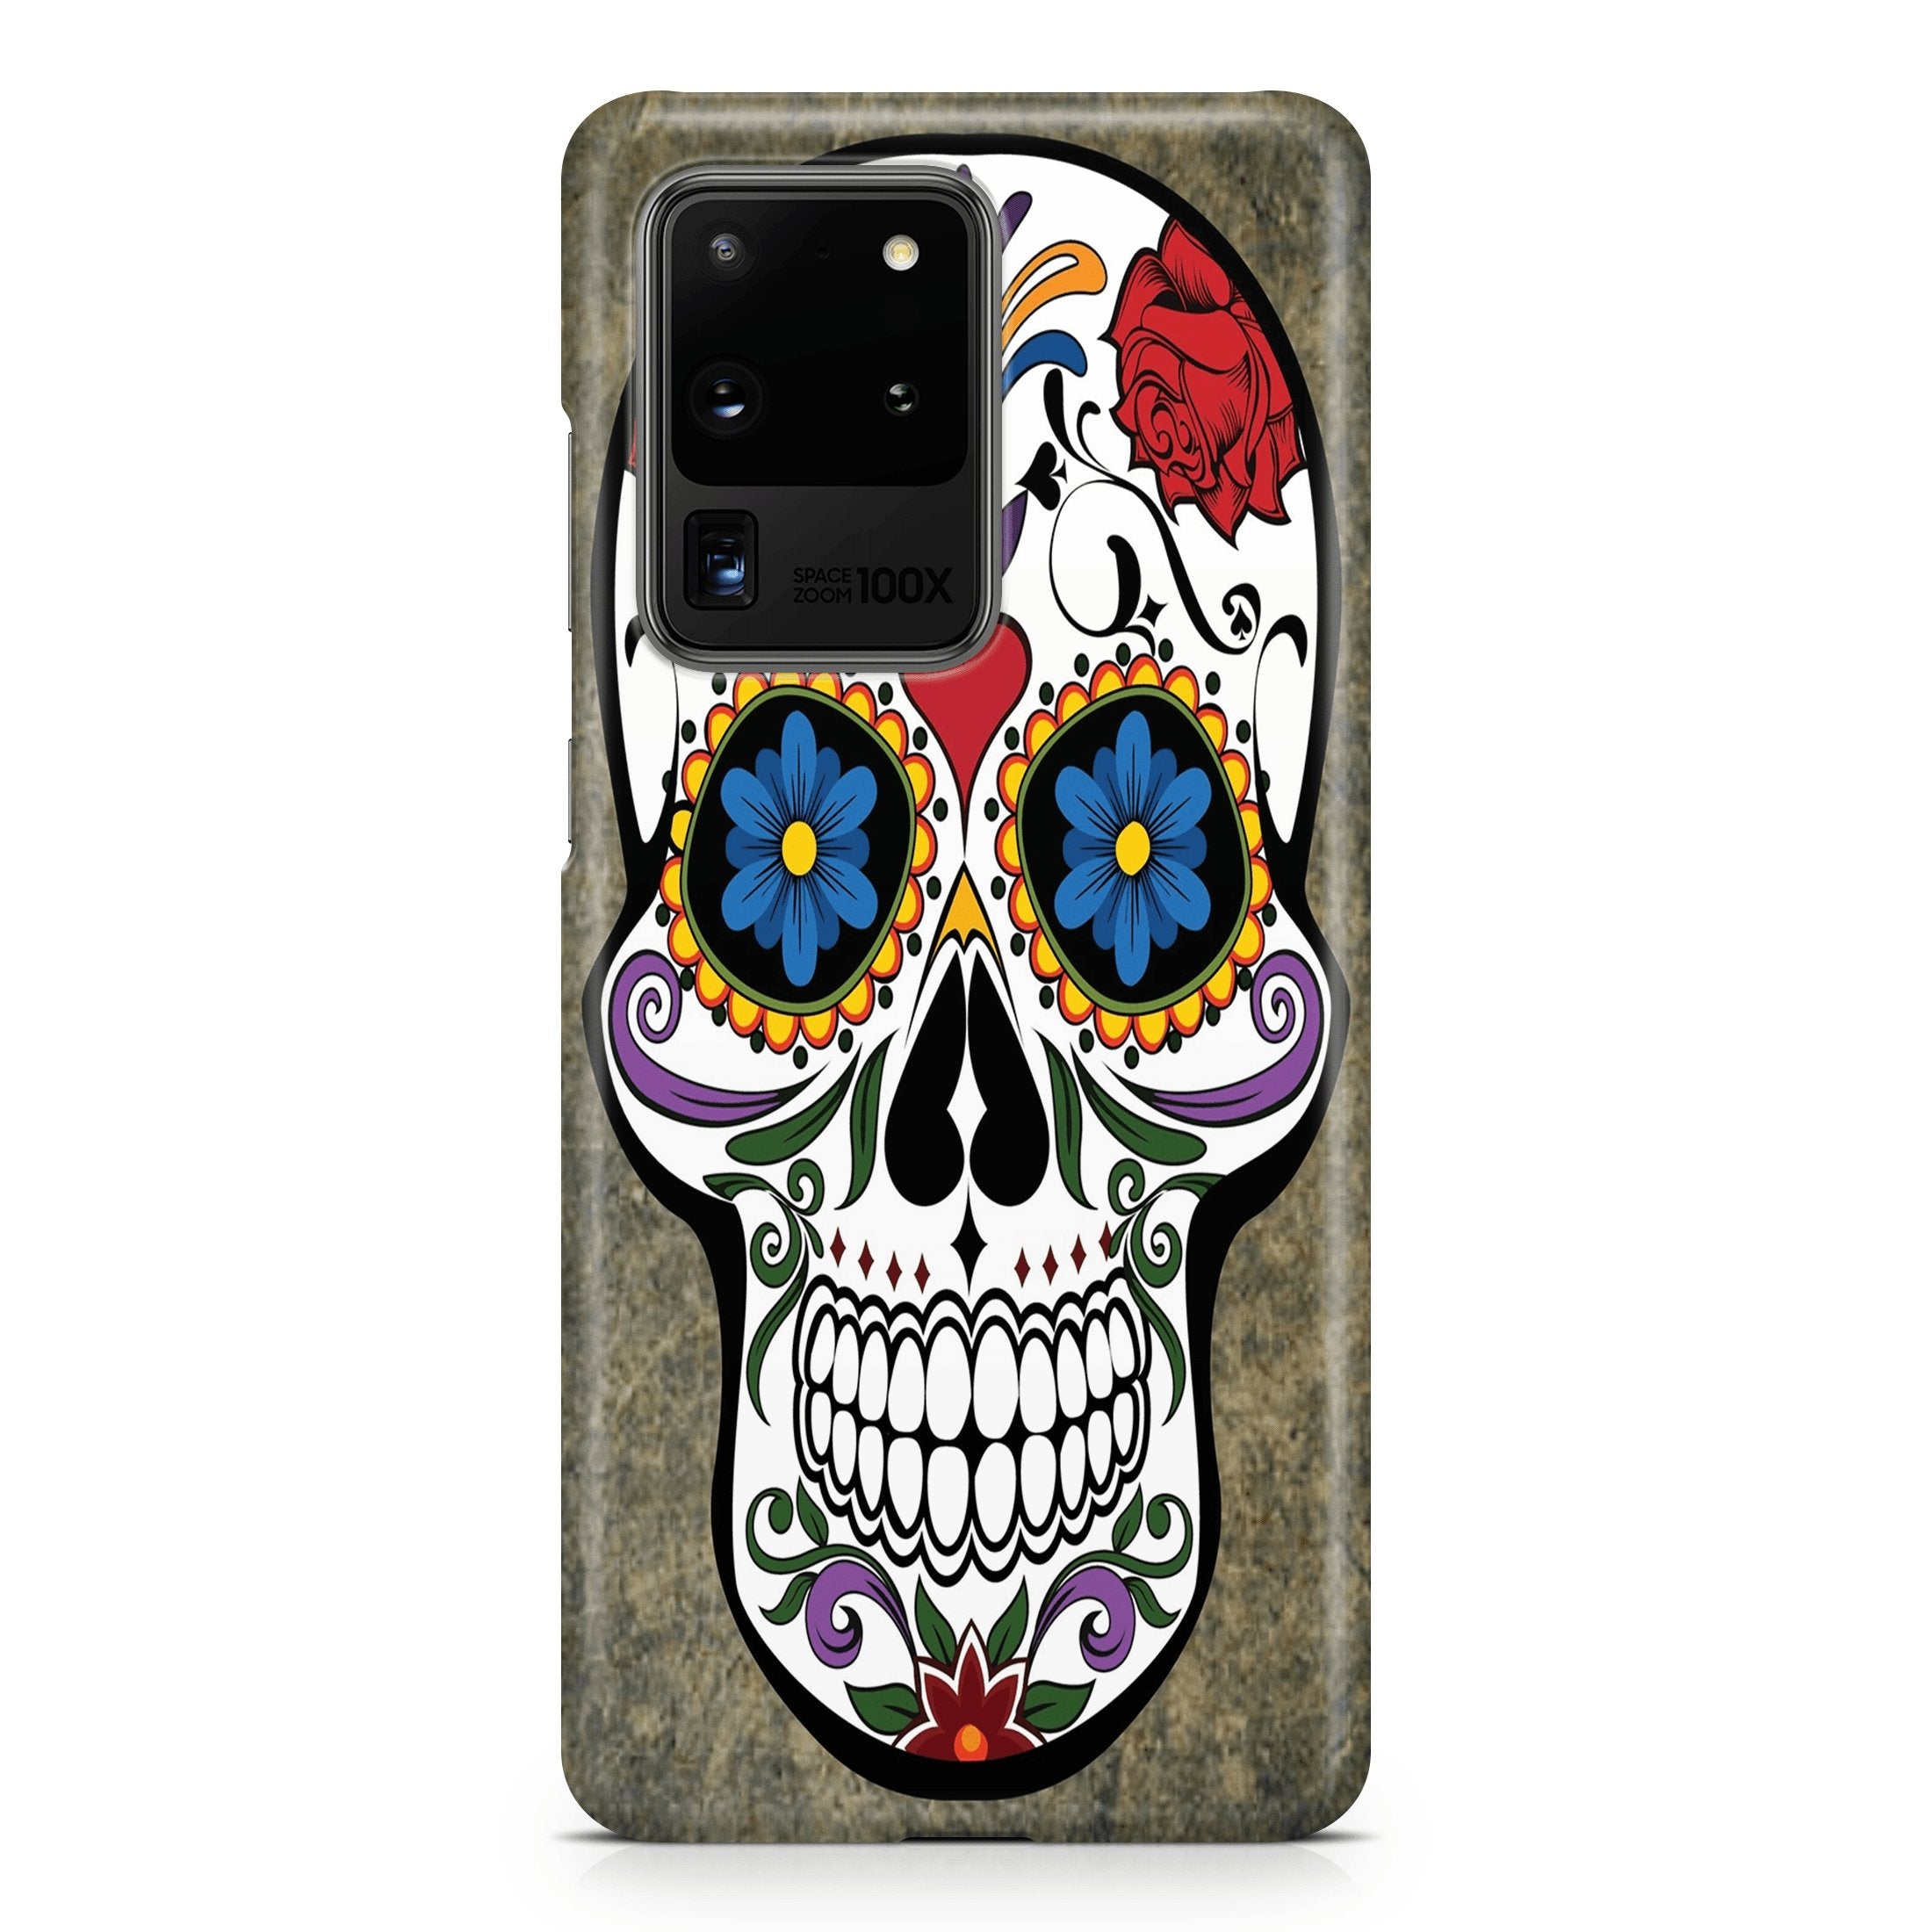 Voodoo Lover - Samsung phone case designs by CaseSwagger